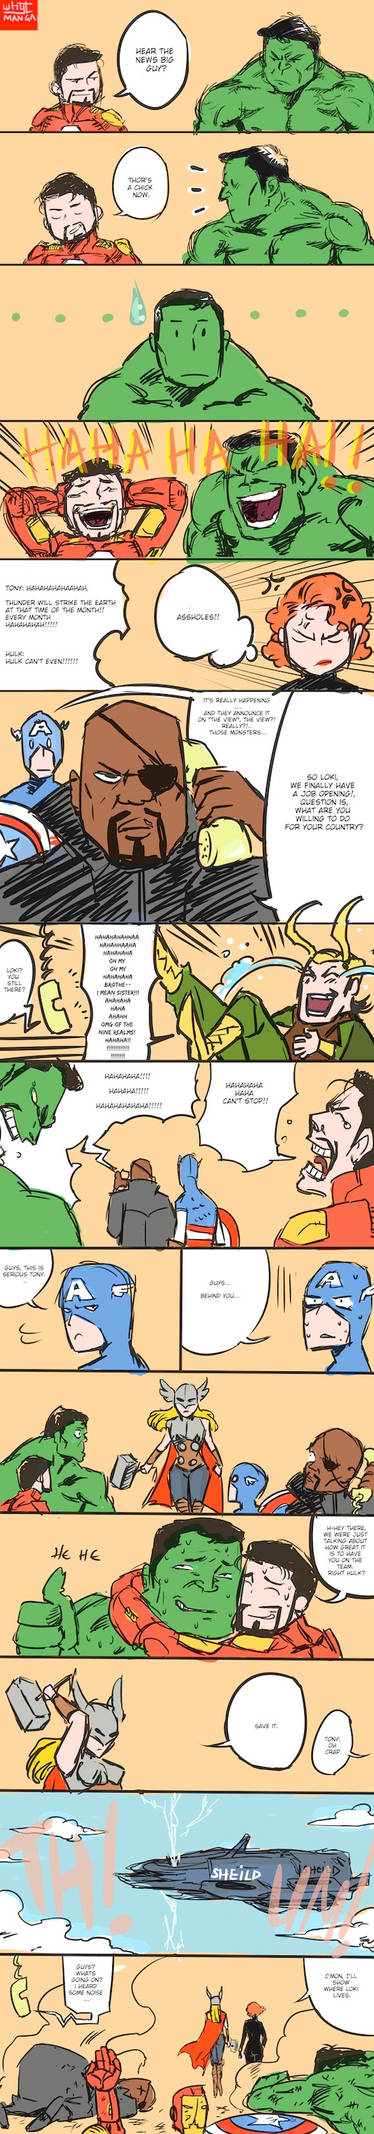 The Avengers React to Thor's Sex Change (UPDATED)